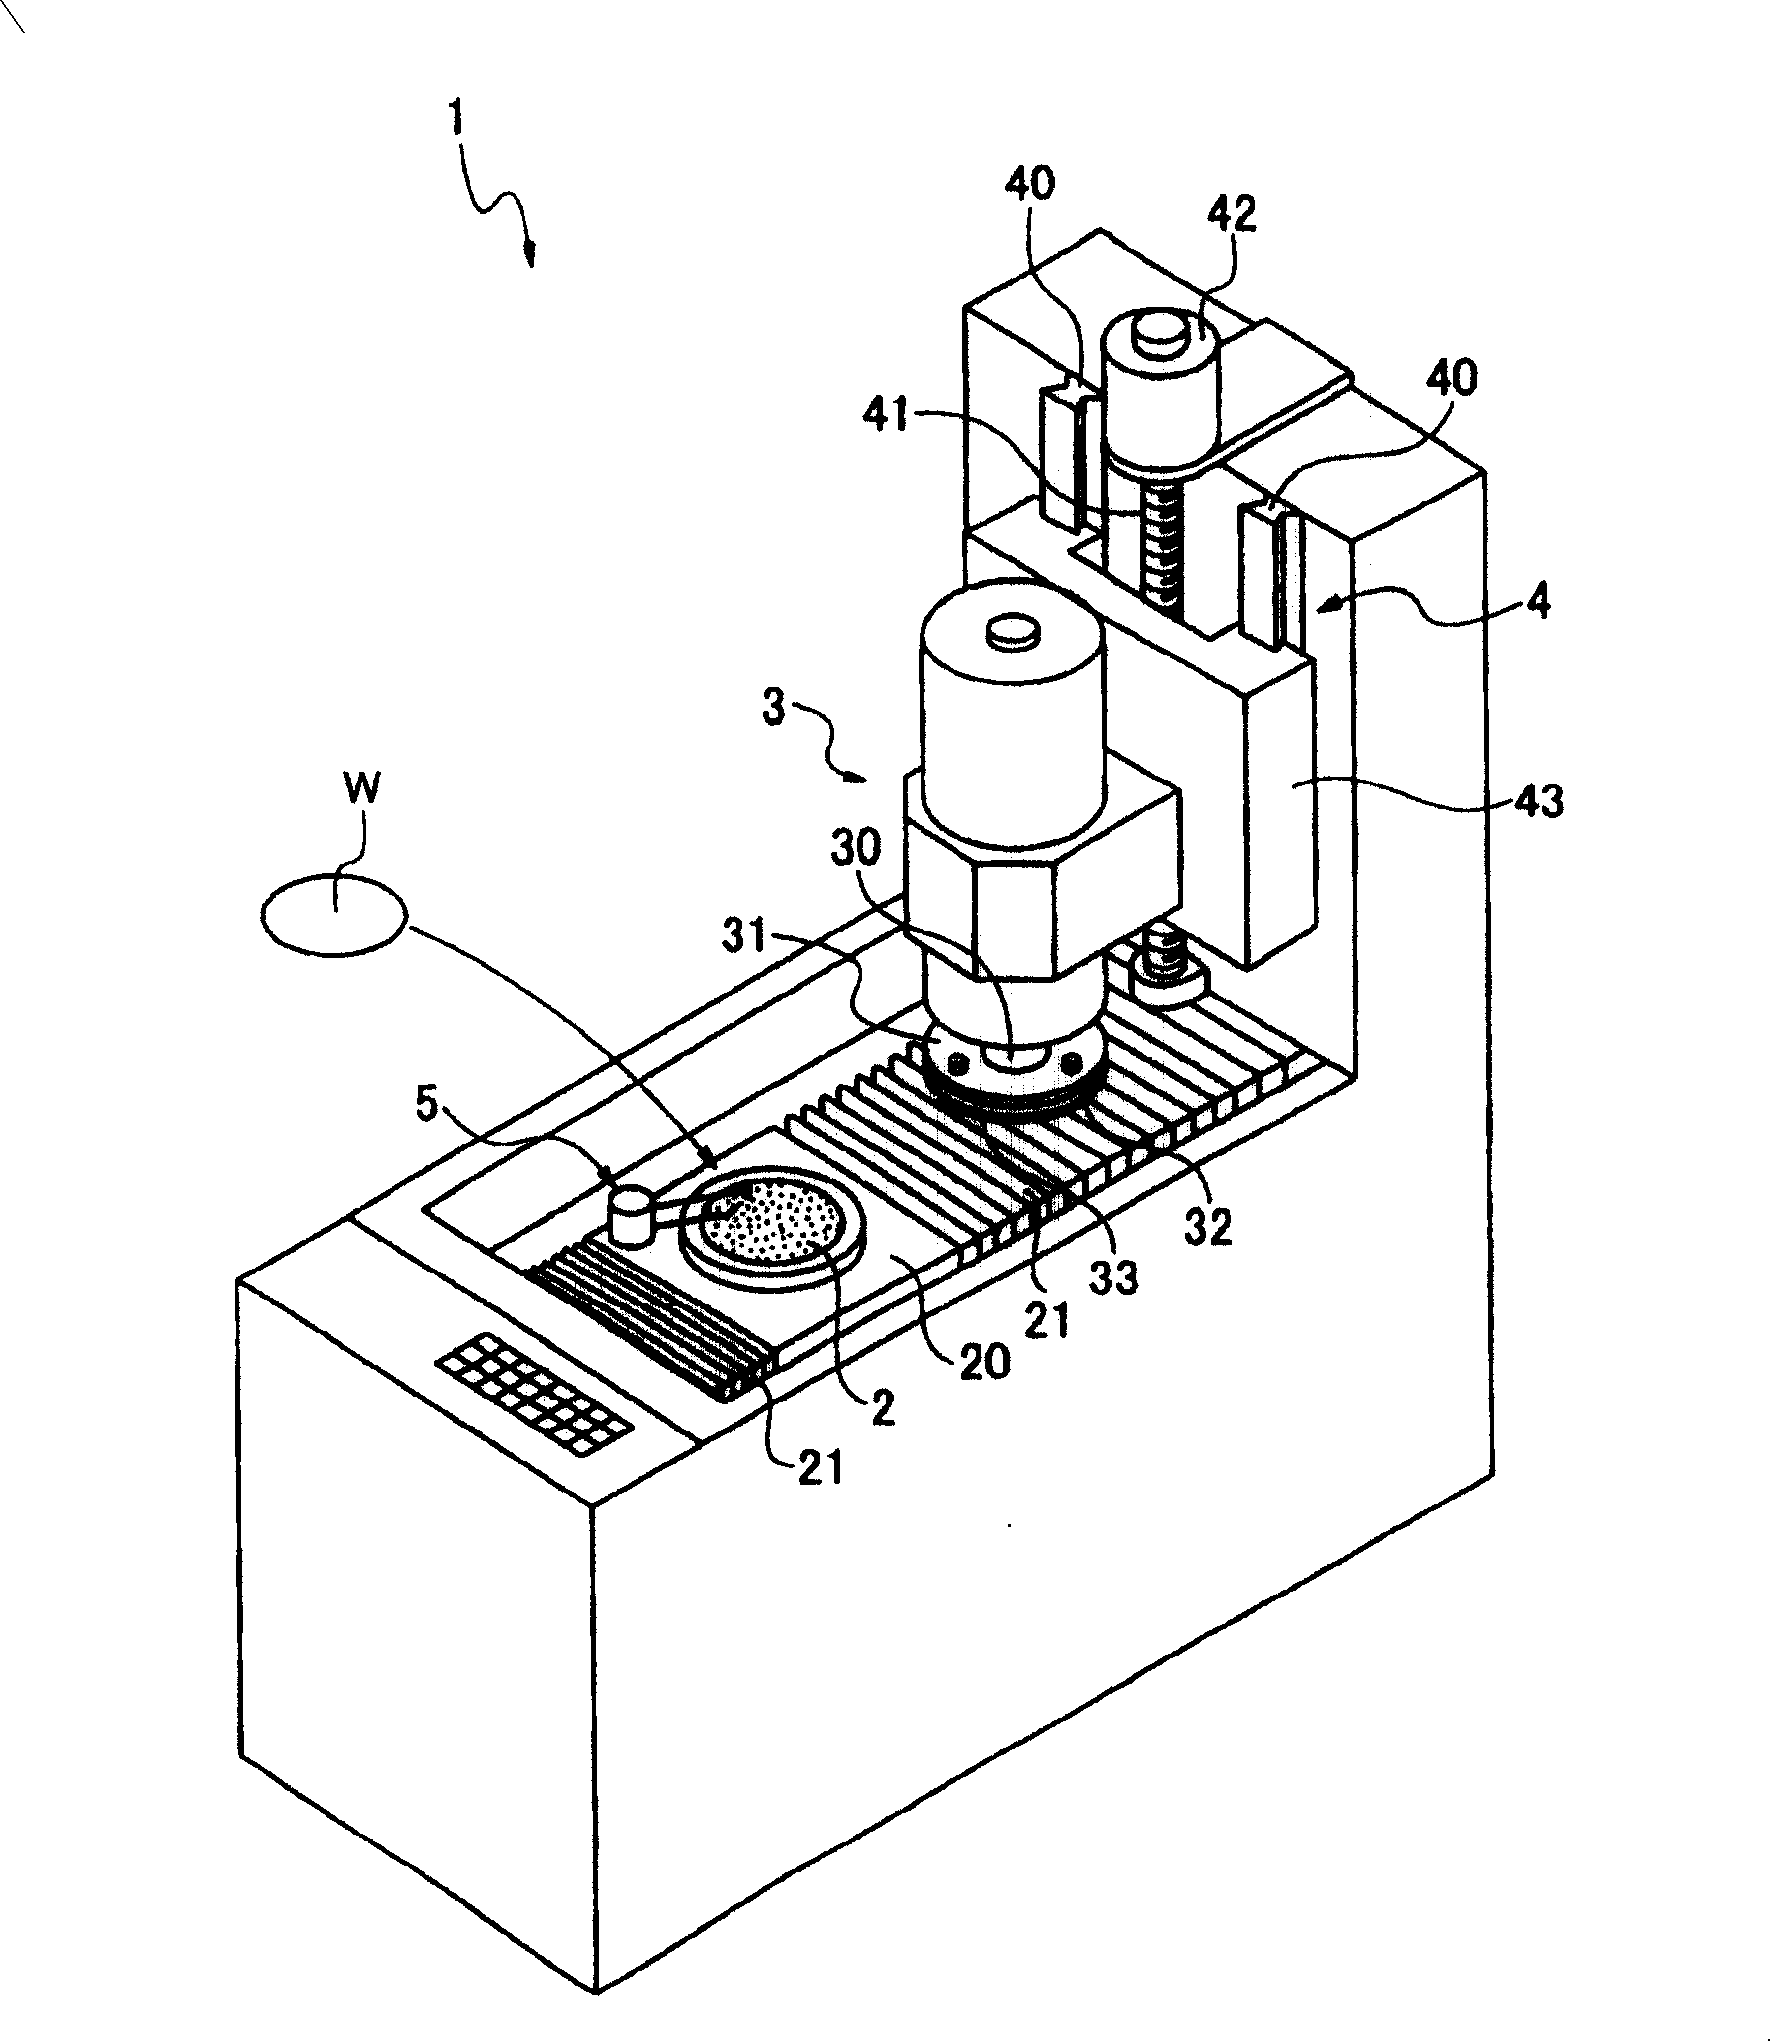 Wafer grinding device and method